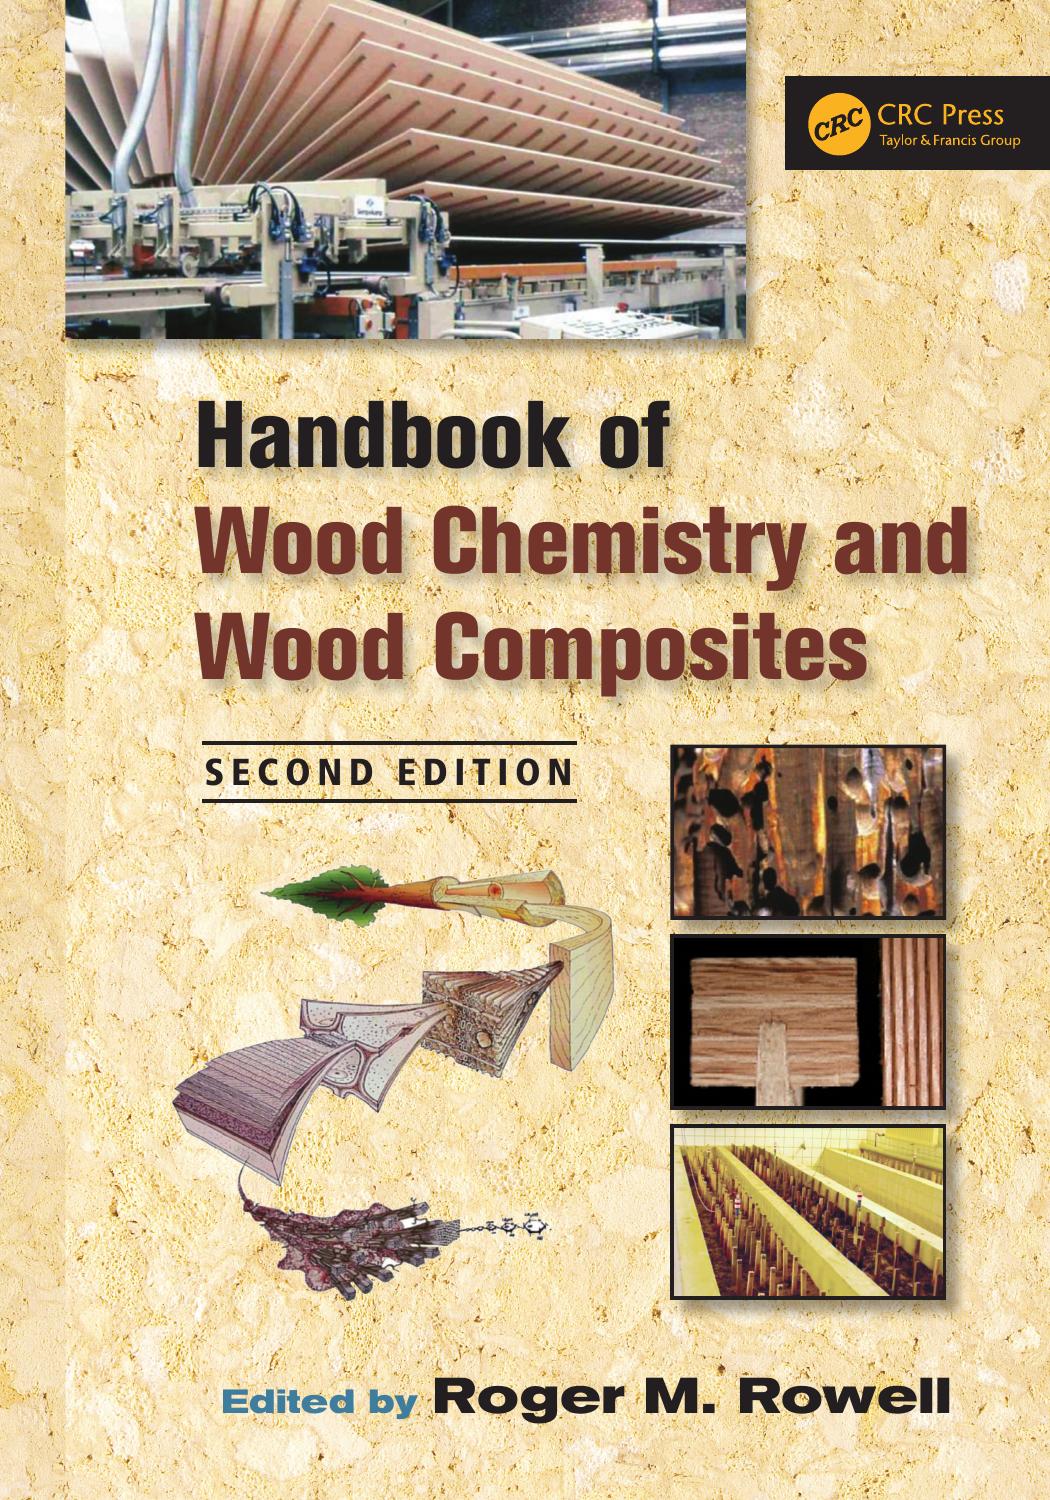 Handbook of Wood Chemistry and Wood Composites, Second Edition